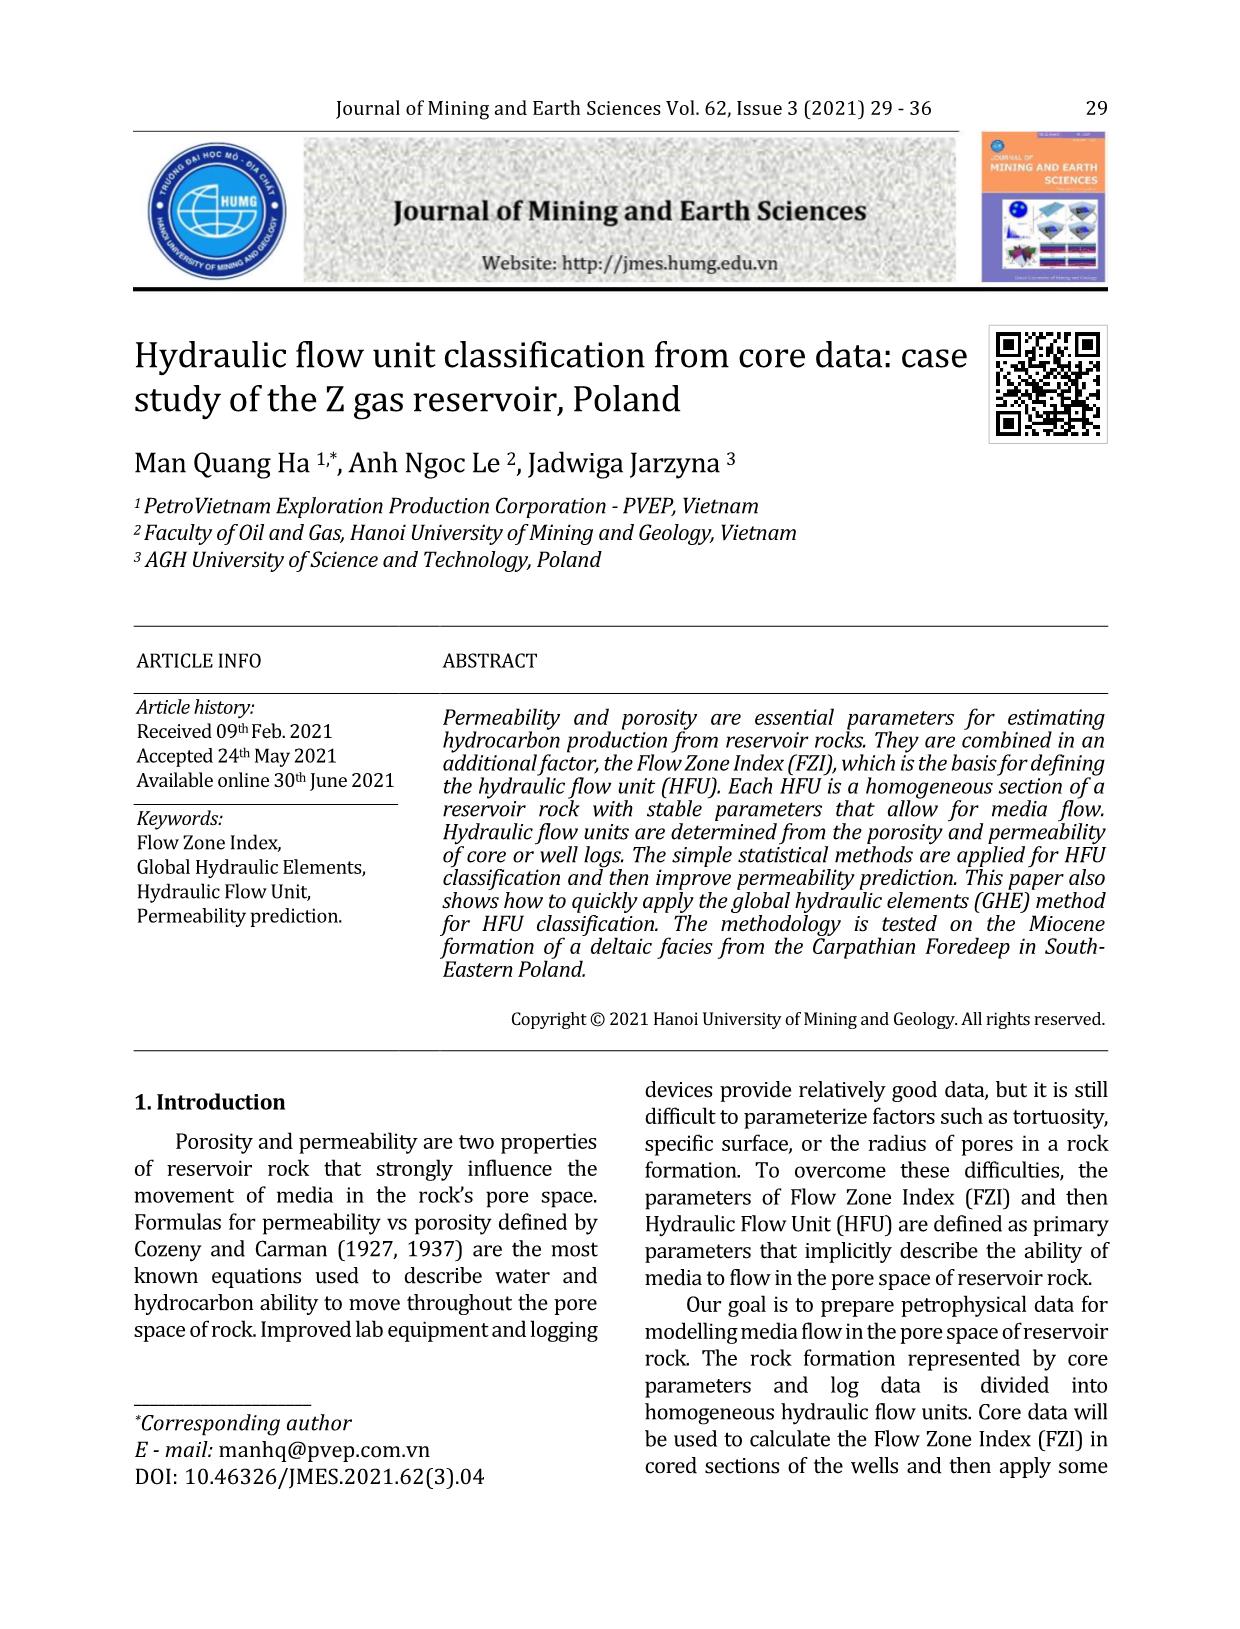 Hydraulic flow unit classification from core data: Case study of the Z gas reservoir, Poland trang 1